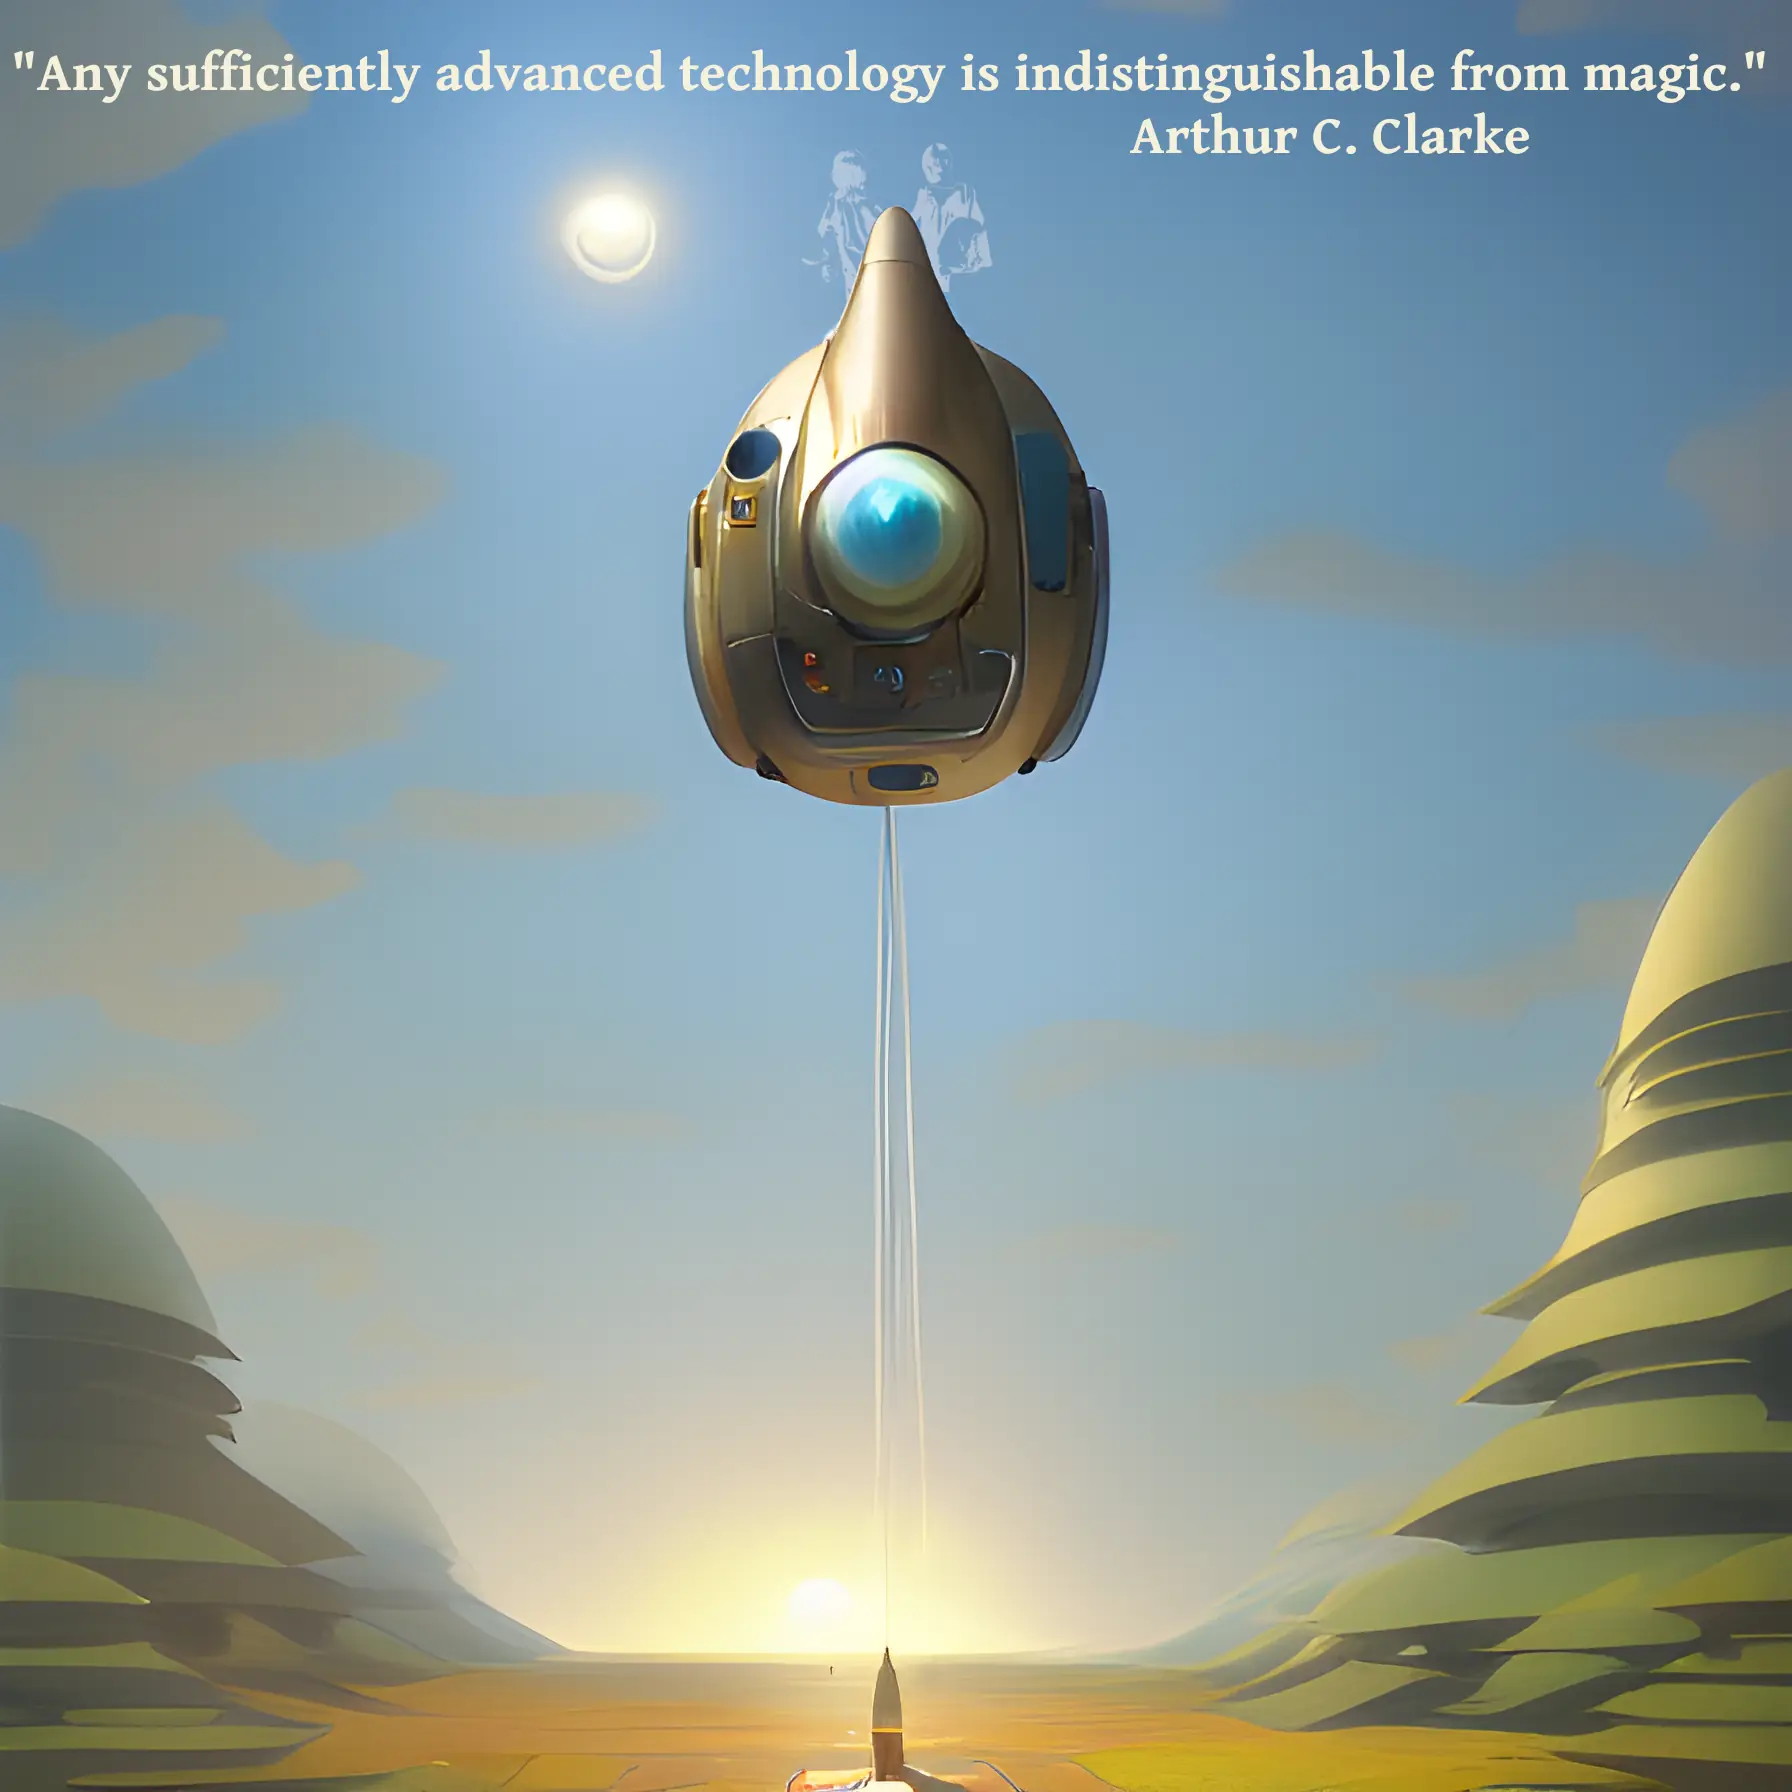 An odd spaceship hovers high above an obelisk on the ground. A slim beam of light travels between them. A quote reads: Any sufficiently advanced technology is indistinguishable from magic.